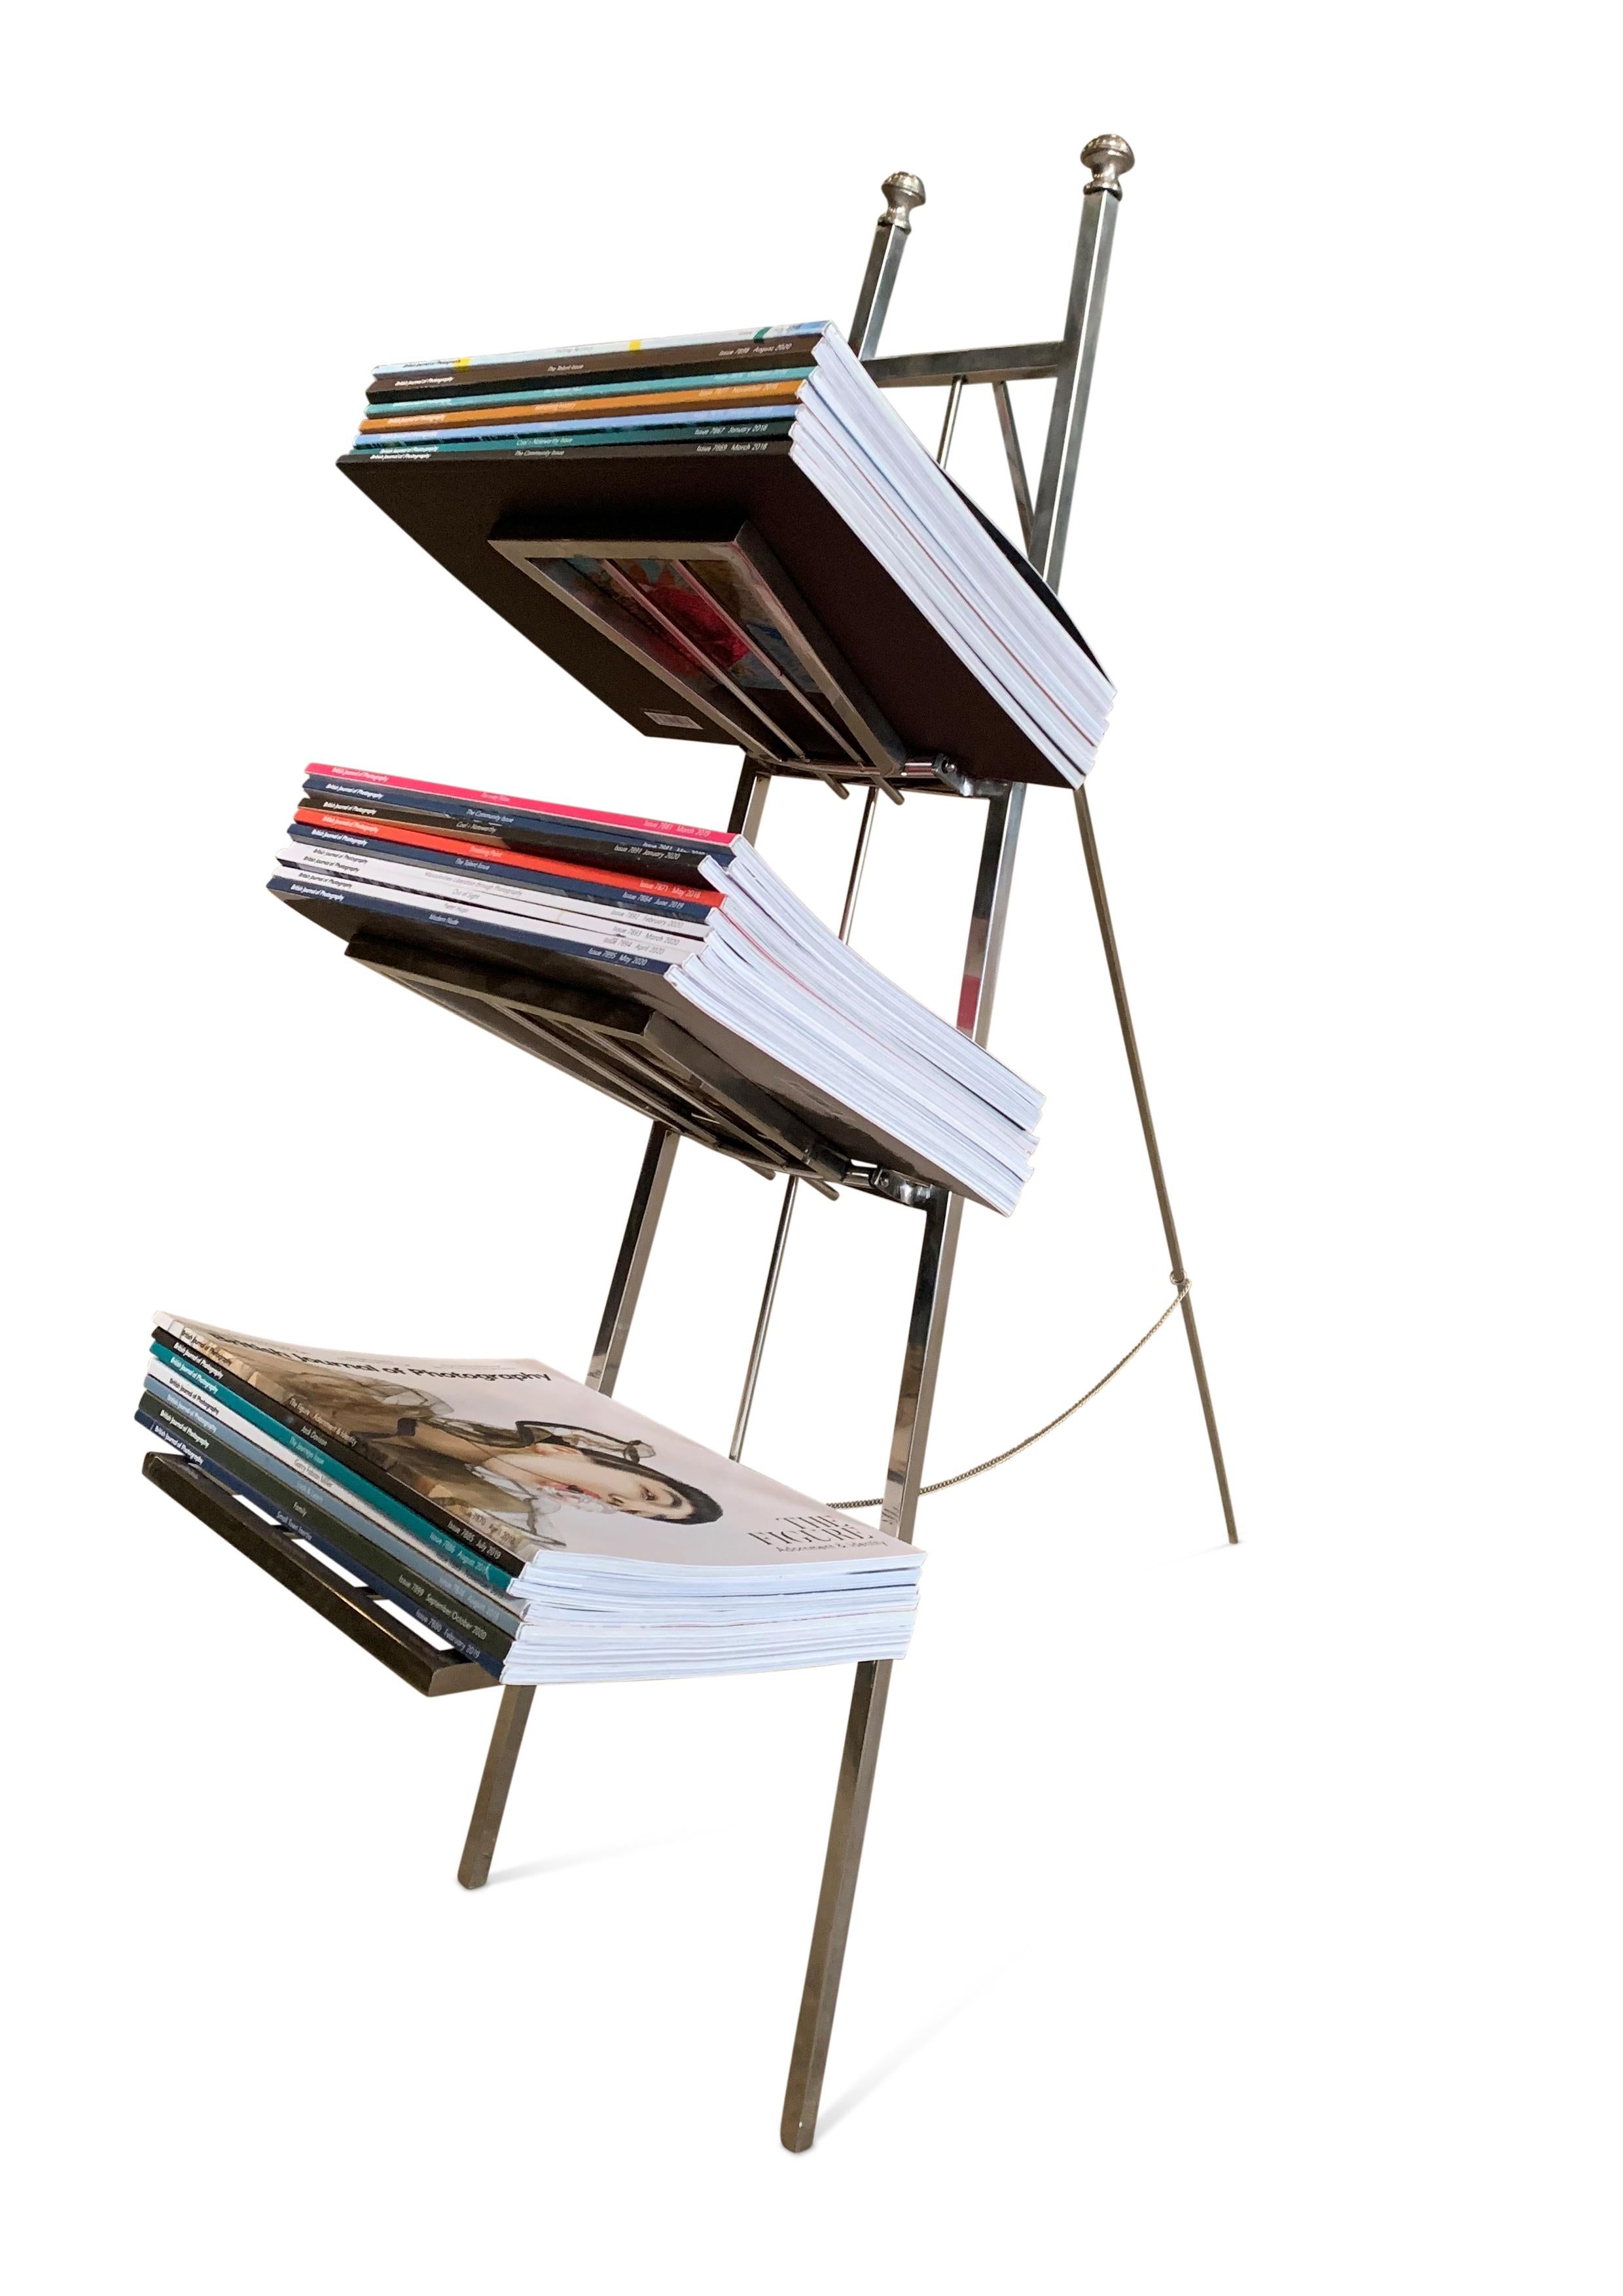 Art Deco Chromed Steel Folding Magazine Rack In a Figurative Ladder Form.

A really fun piece for a library or living space to hold magazine's.

